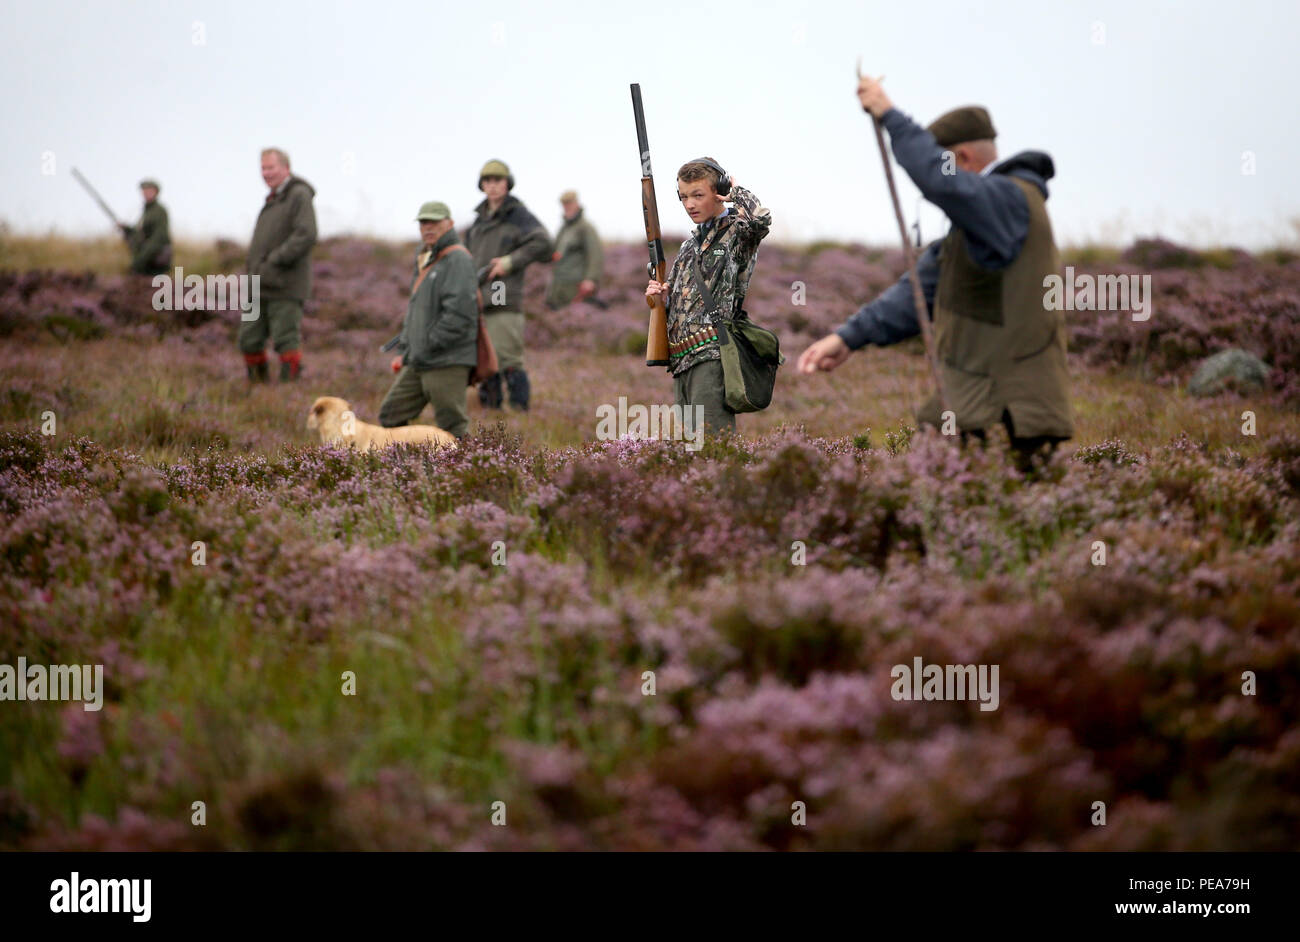 Members of a shooting party on Forneth moor near Dunkeld, Perthshire, as the grouse shooting season gets underway. Stock Photo